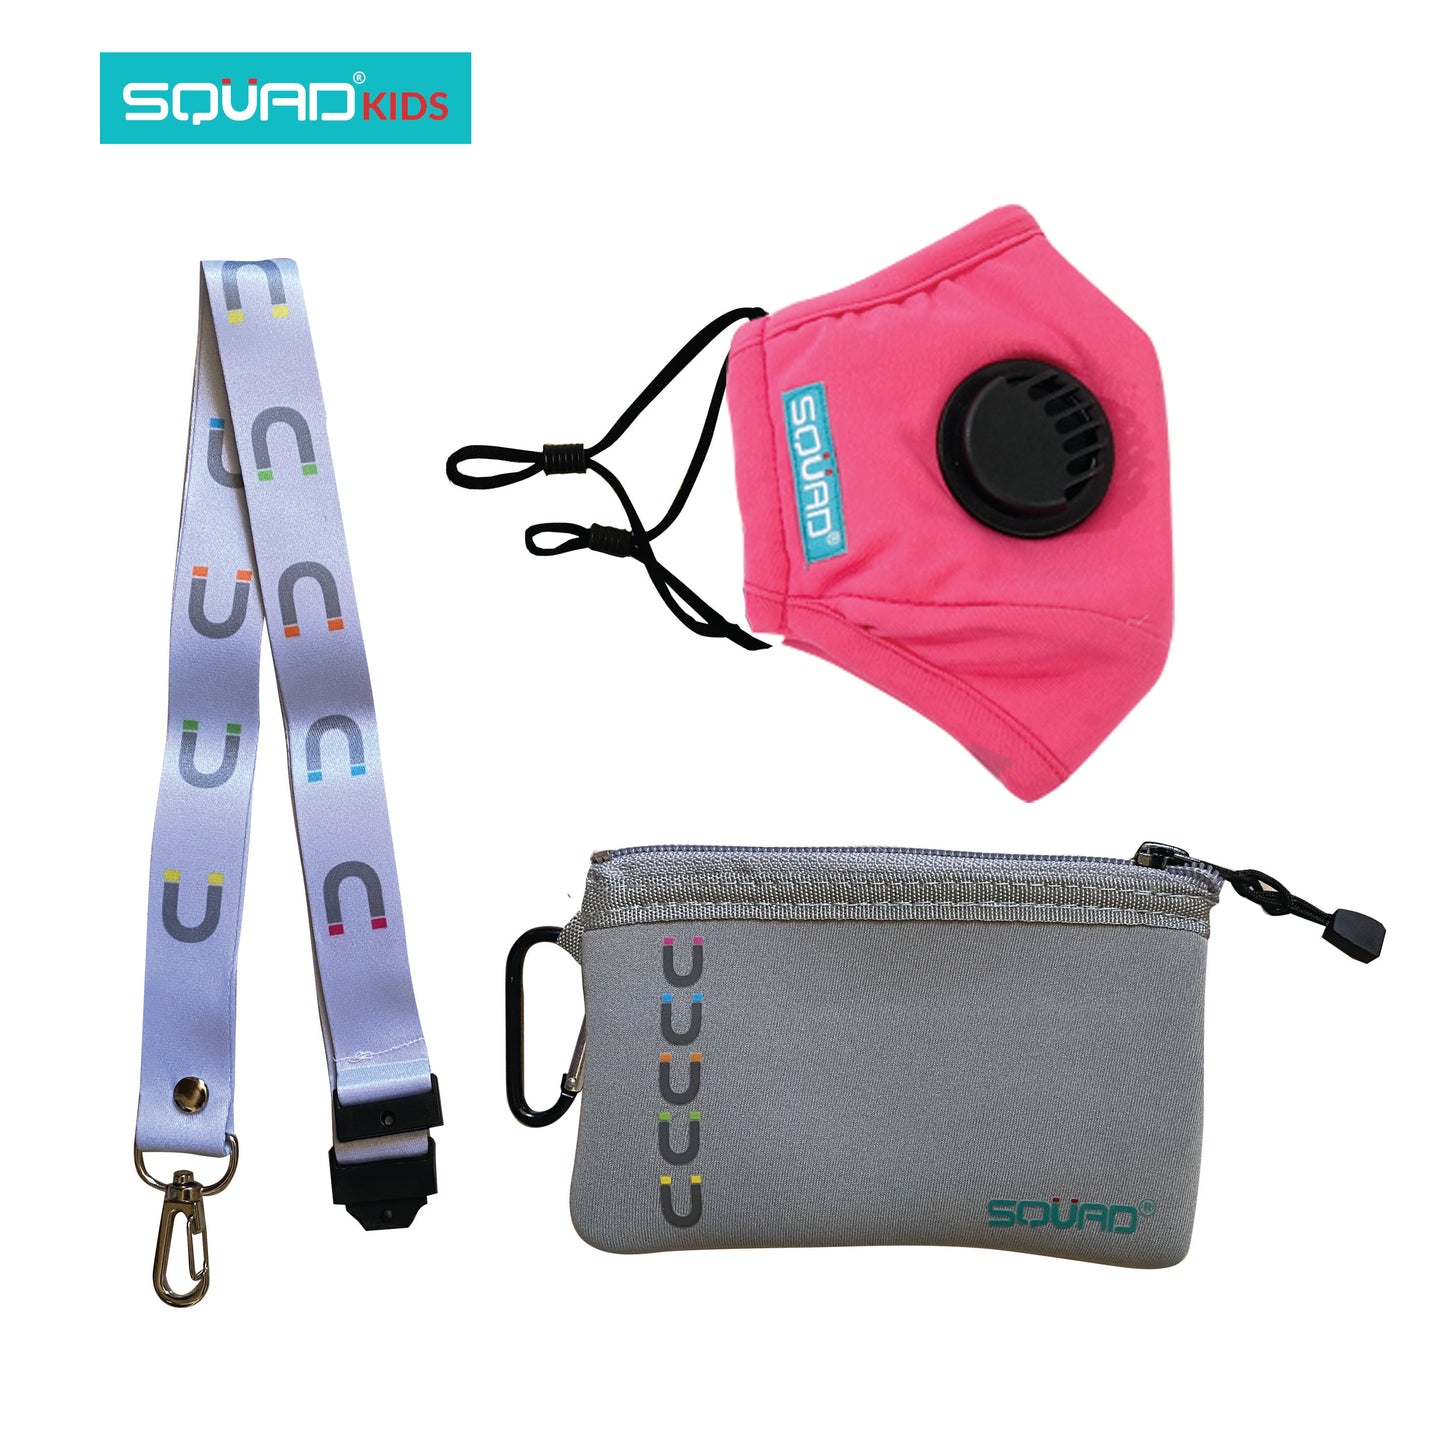 Kids Reusable and Washable Masks. Comes with a Neoprene pouch, carabiner and lanyard for easy storage and mobility